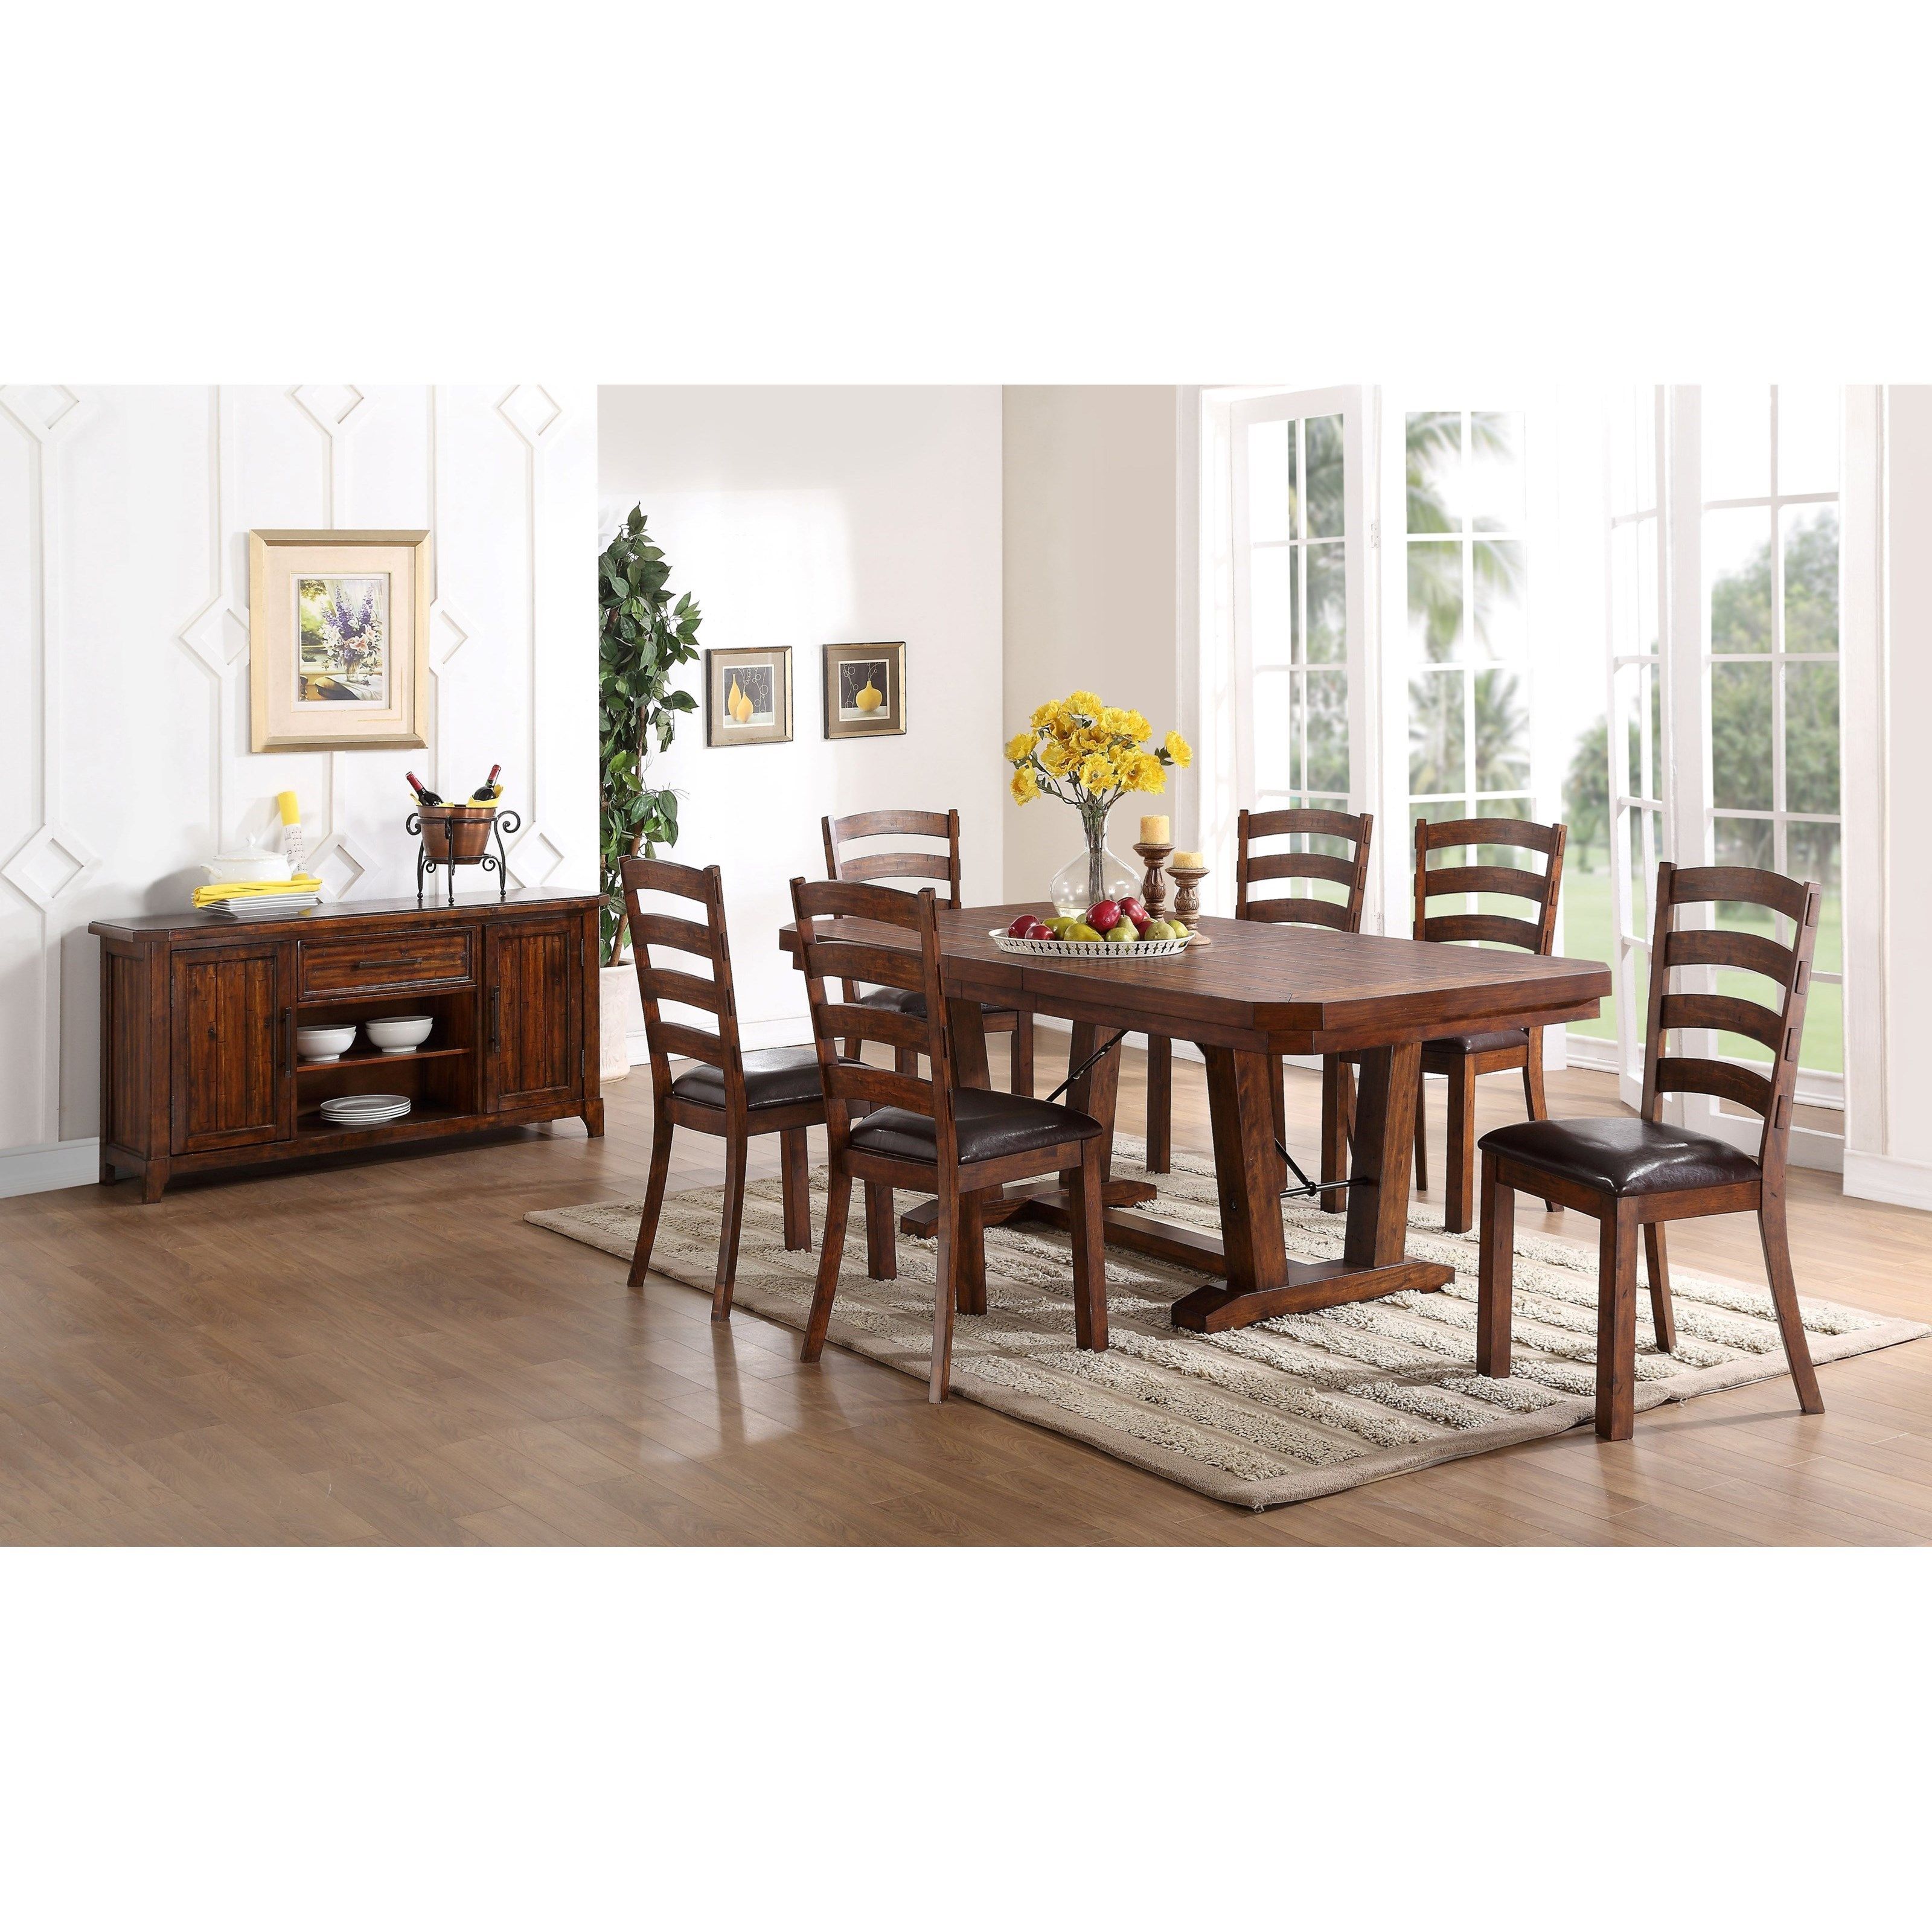 New Classic Lanesboro Formal Dining Room Group | Furniture Pertaining To Lanesboro Sideboards (View 19 of 30)